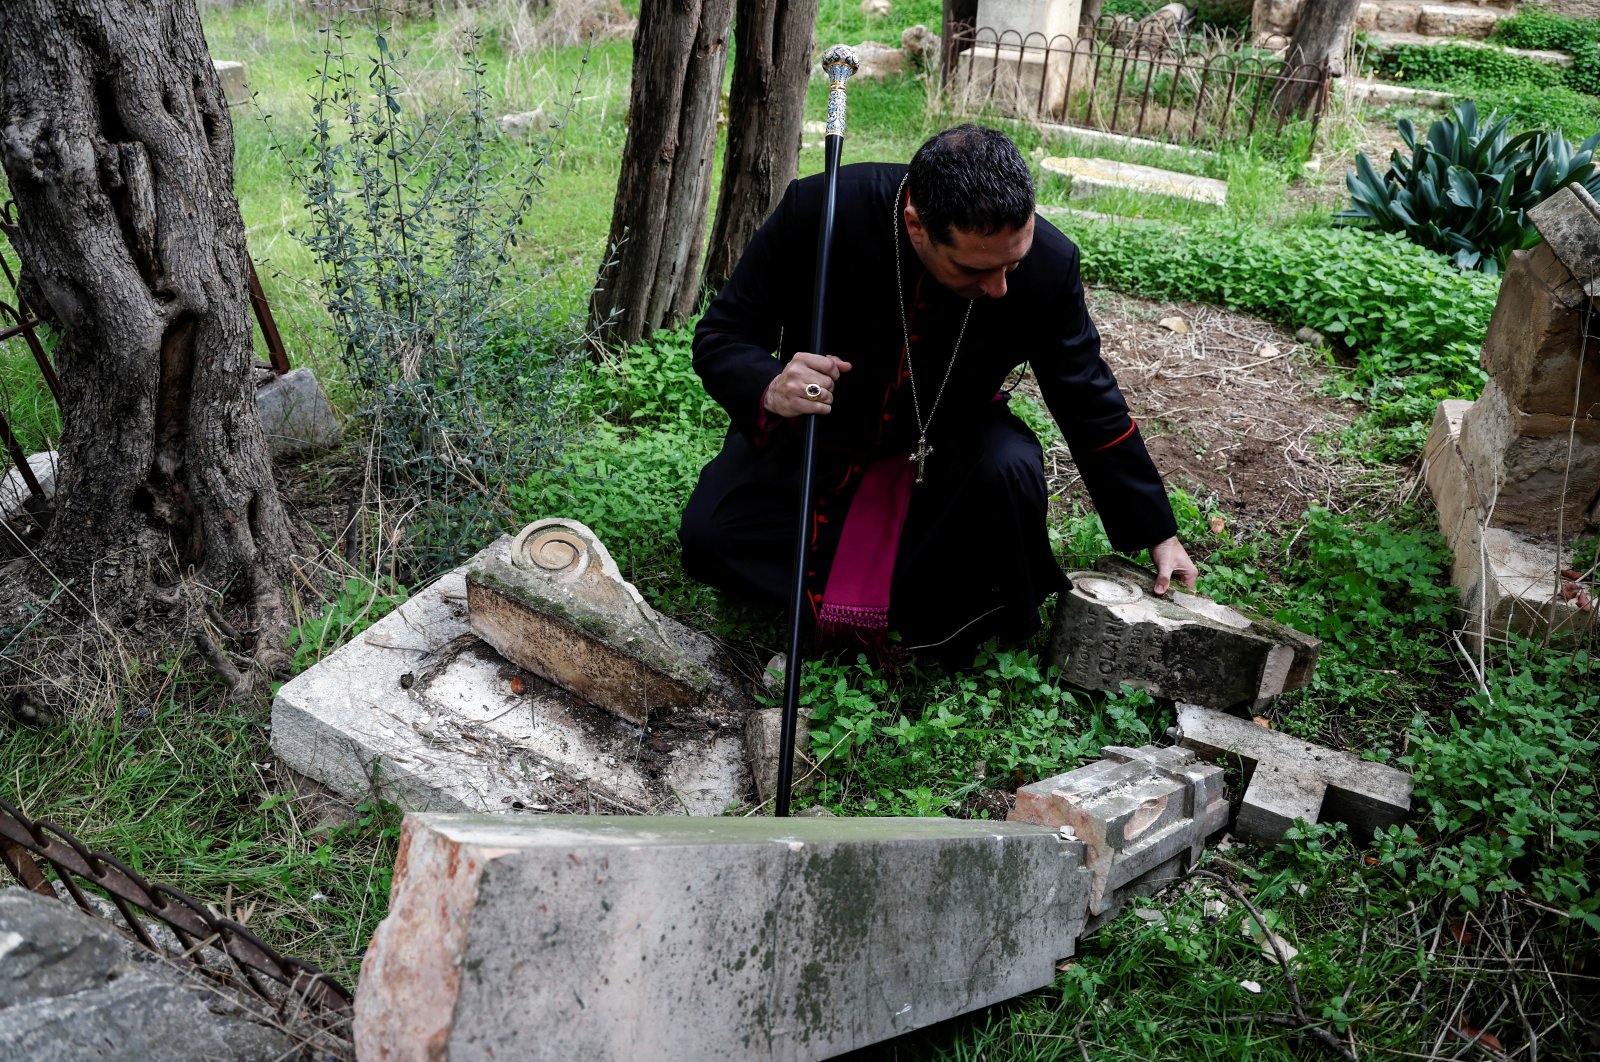 Archbishop Hosam Naoum inspects a vandalized tombstone at the Protestant Mount Zion Cemetery in Jerusalem Jan. 4, 2023. (Reuters File Photo)